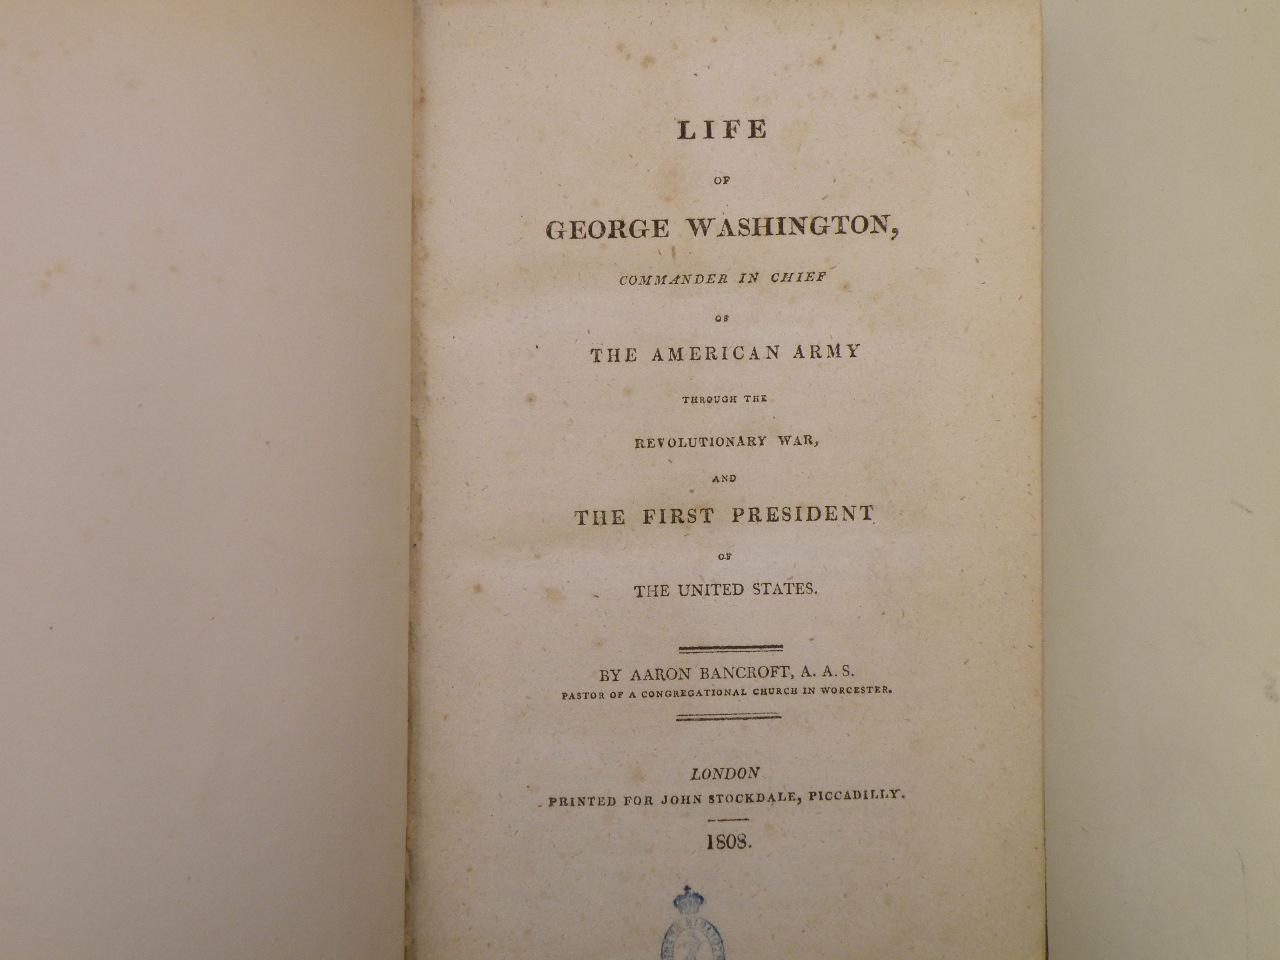 The Life of George Washington, Commander in Chief of the American Army Through the Revolutionary War : And the First President of the United States. Volume II